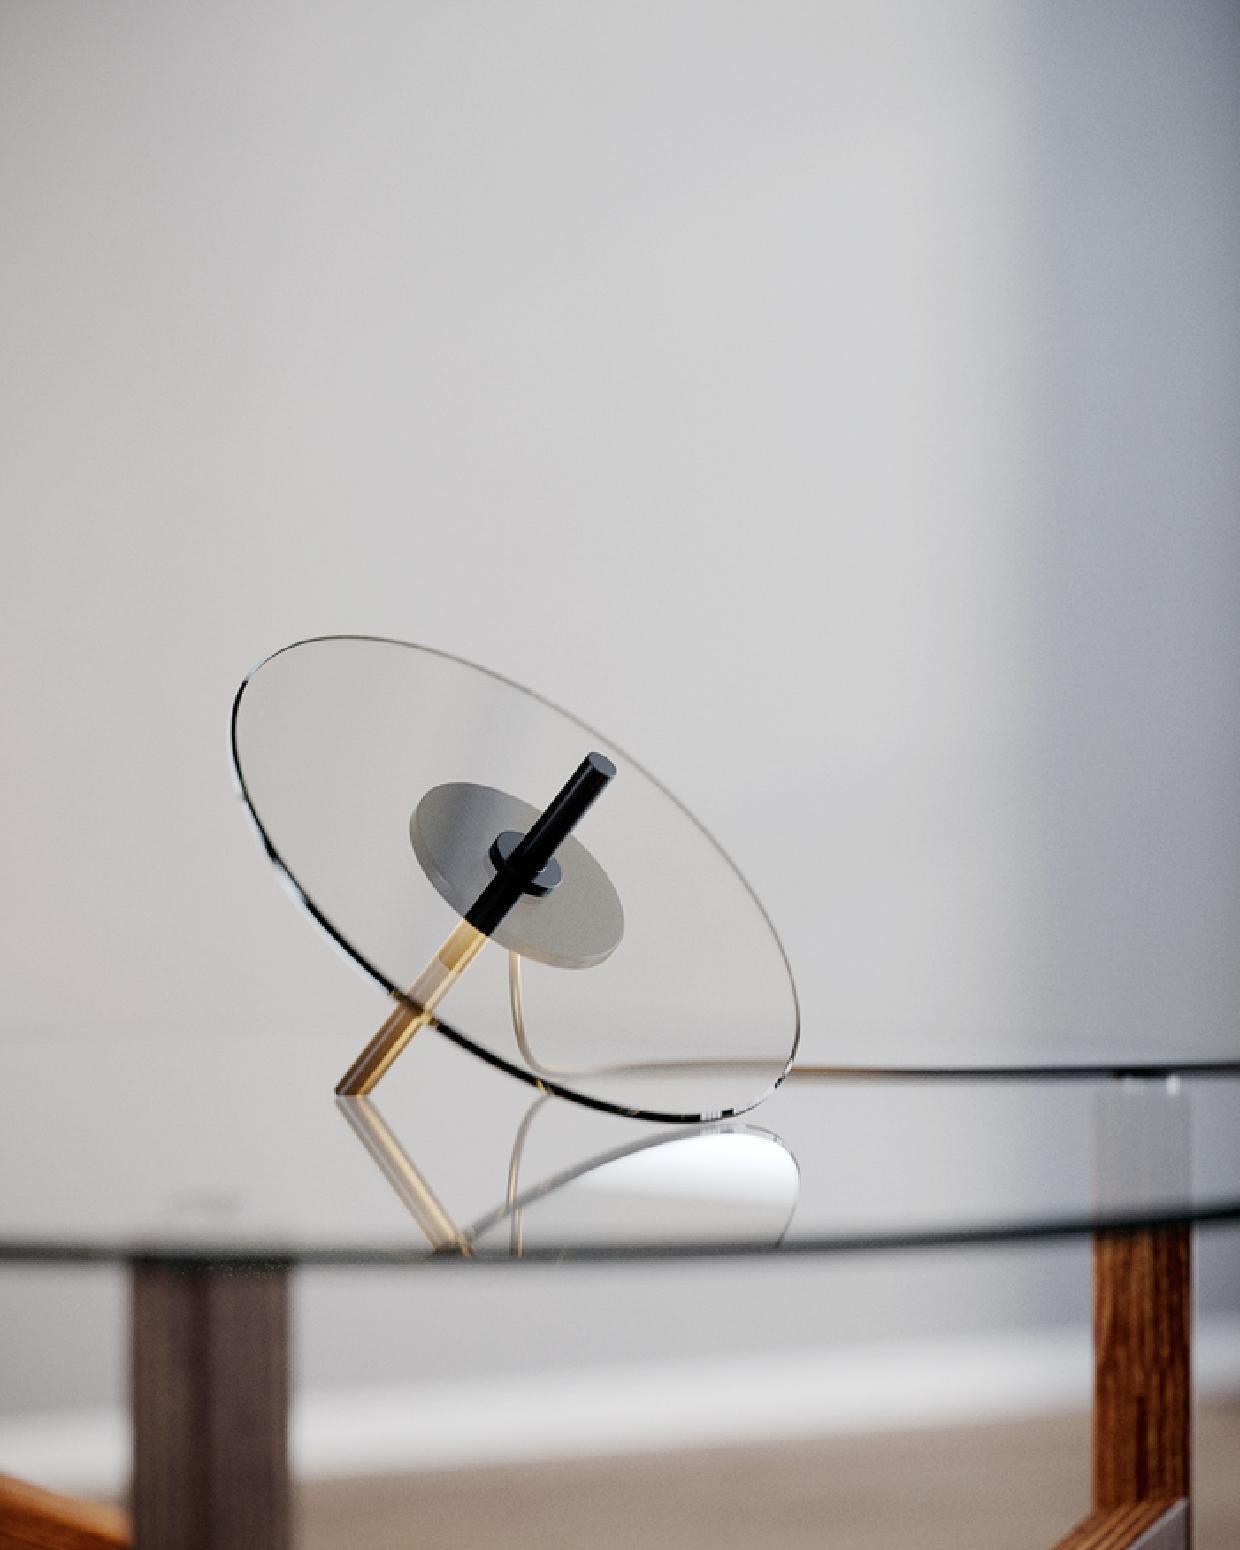 Designed by Daniel Rybakken, whose work occupies the area between art and design, forming limited editions, art installations and prototypes for serial production.

A sculptural and playful piece. The LED light source does not illuminate the disc